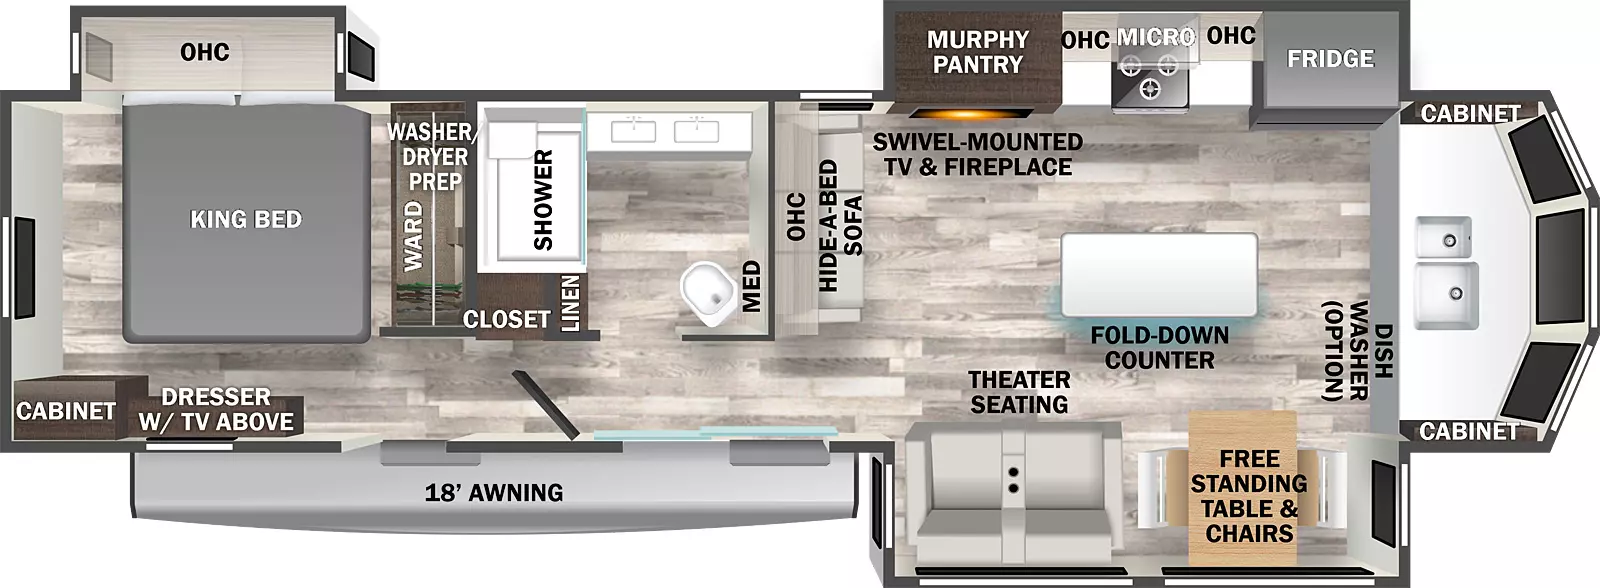 The 40CFK2 has three slideouts, and two entries. Exterior features include an 18 foot awning. Interior layout front to back: kitchen counter with sink and cabinets in front alcove with windows (dish washer optional); door side slideout with free-standing table and chairs and power theater seating; kitchen island with fold-down counter; off-door side slideout with refrigerator, microwave, stove, overhead cabinets, and murphy pantry behind swivel mounted TV and fireplace; interior wall with hide-a-bed sofa and overhead cabinets; sliding glass door entry; off-door side full bathroom with dual vanity sinks, medicine cabinet and linen closet; rear bedroom with closet, step entry, wardrobe with washer/dryer prep, off-door side king bed slideout with overhead cabinets, dresser with TV above, and cabinet.